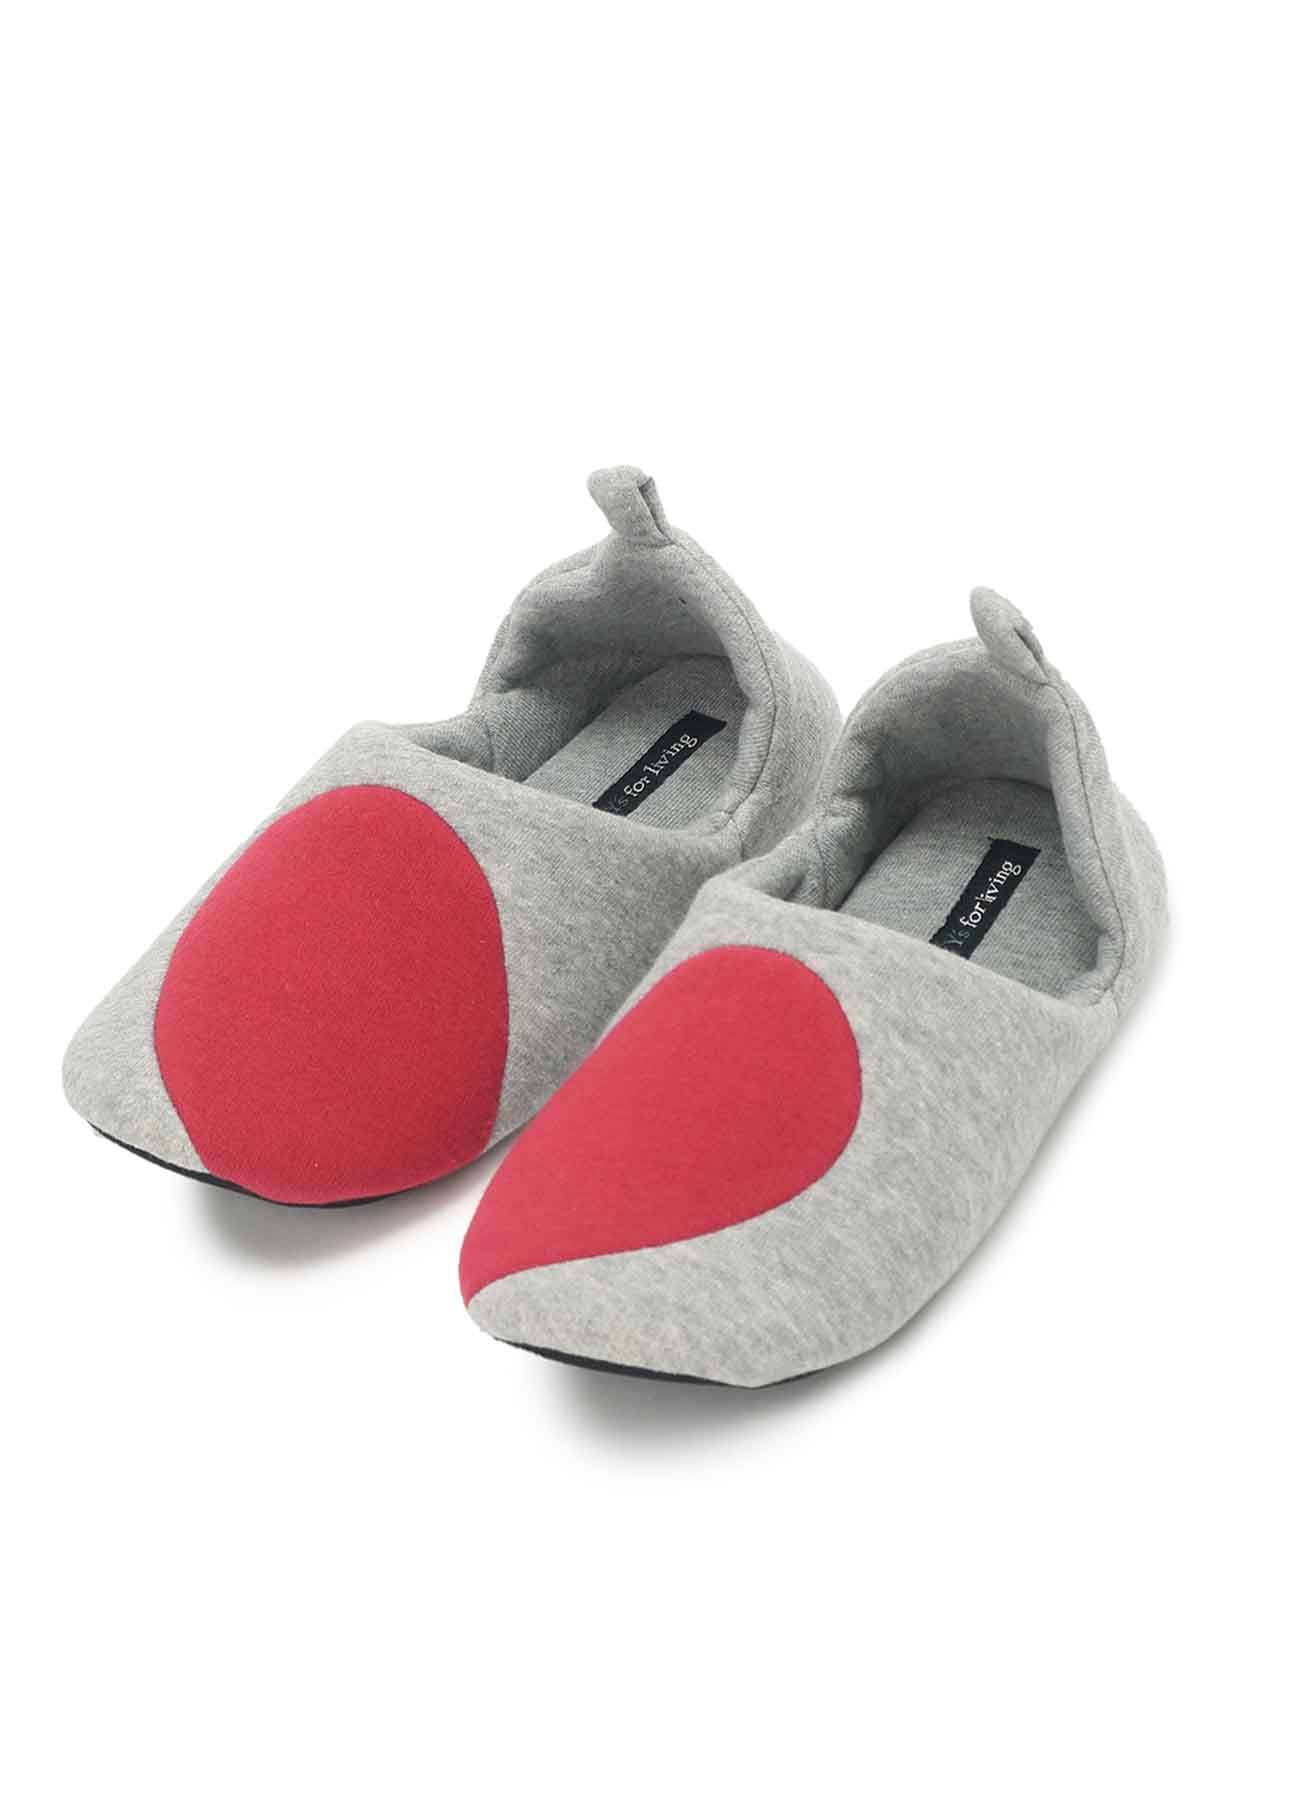 HEART ROOM SHOES (M)